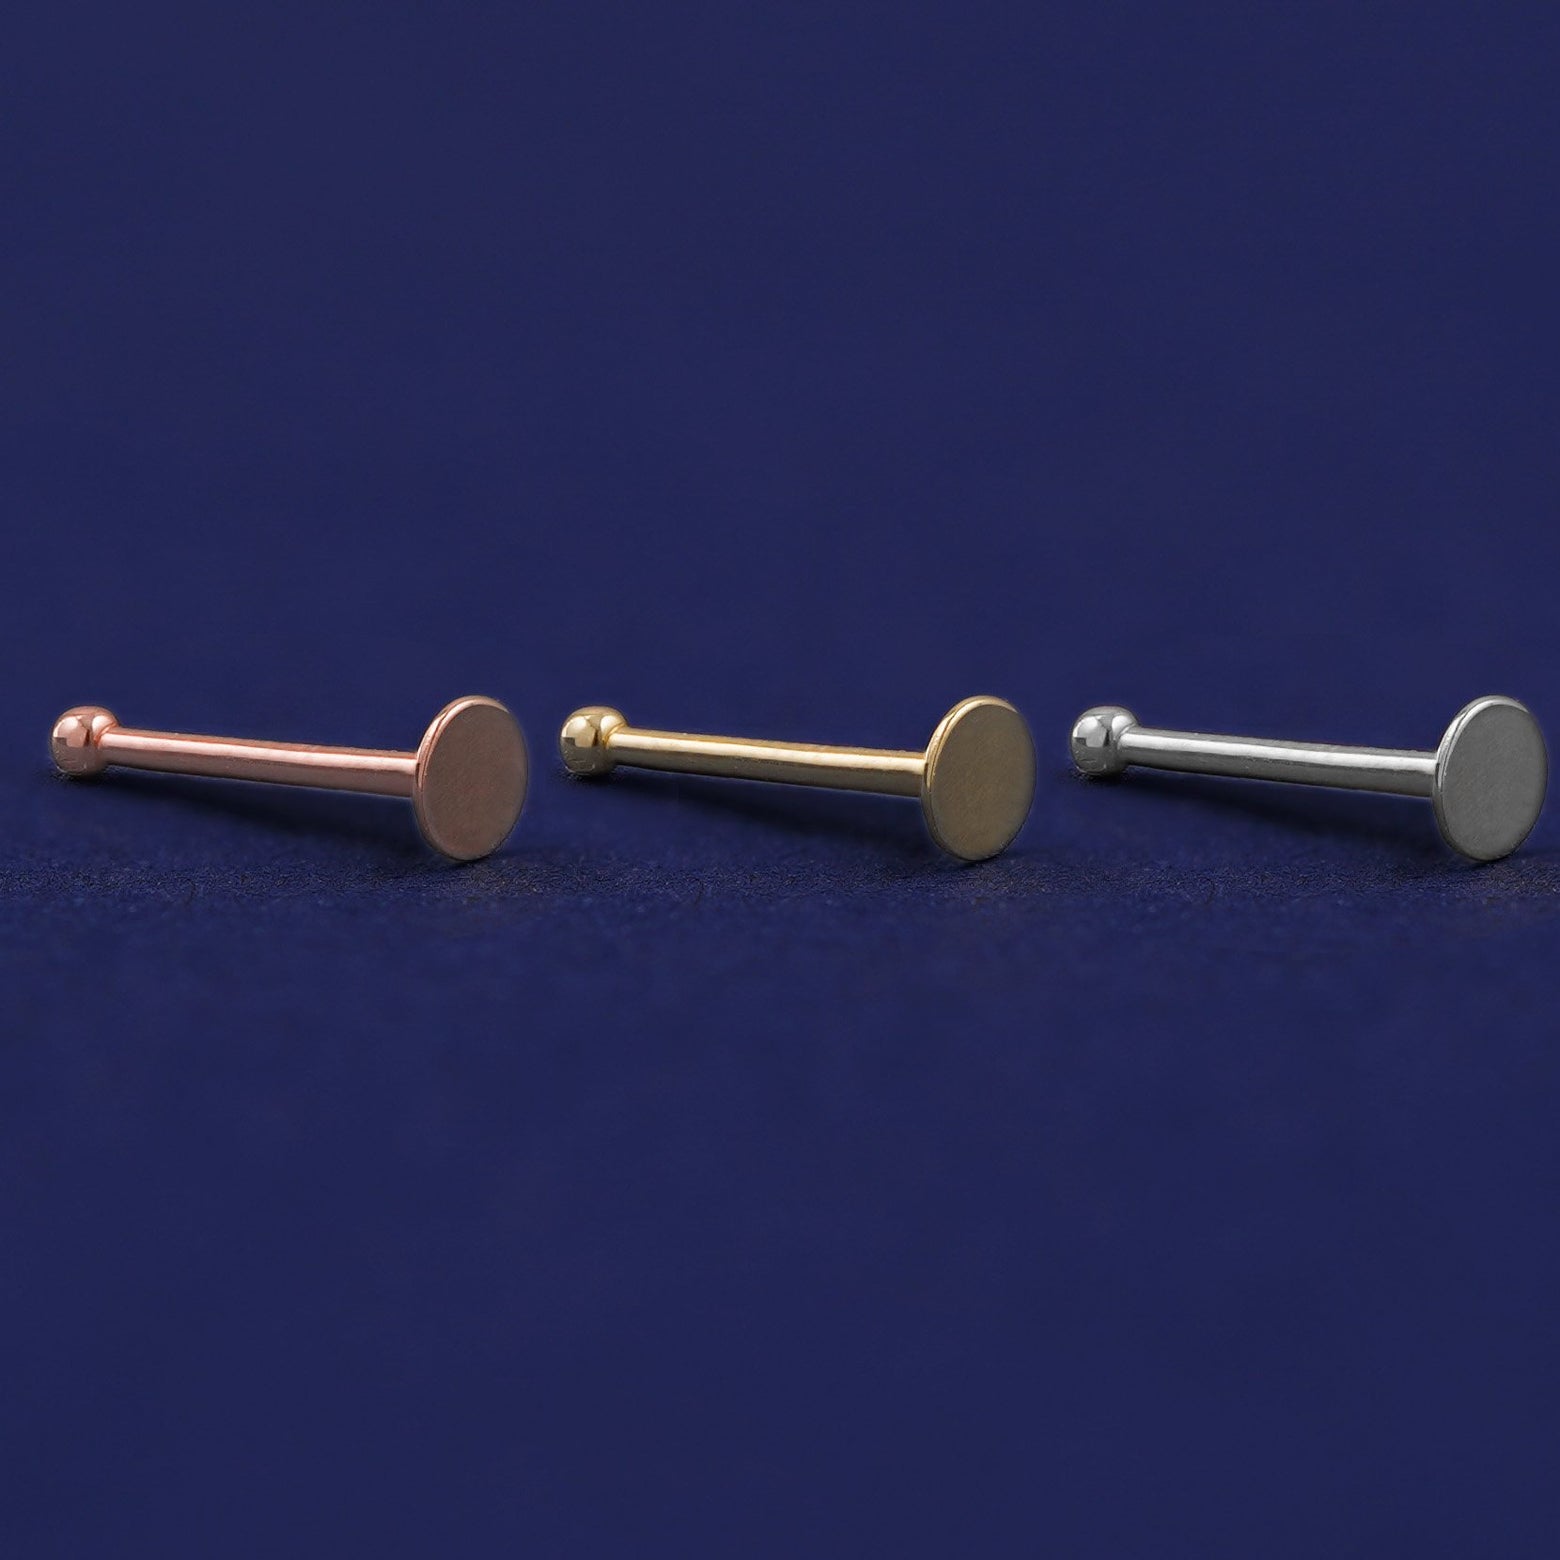 Three versions of the Circle Nose Stud shown in options of rose, yellow, and white gold